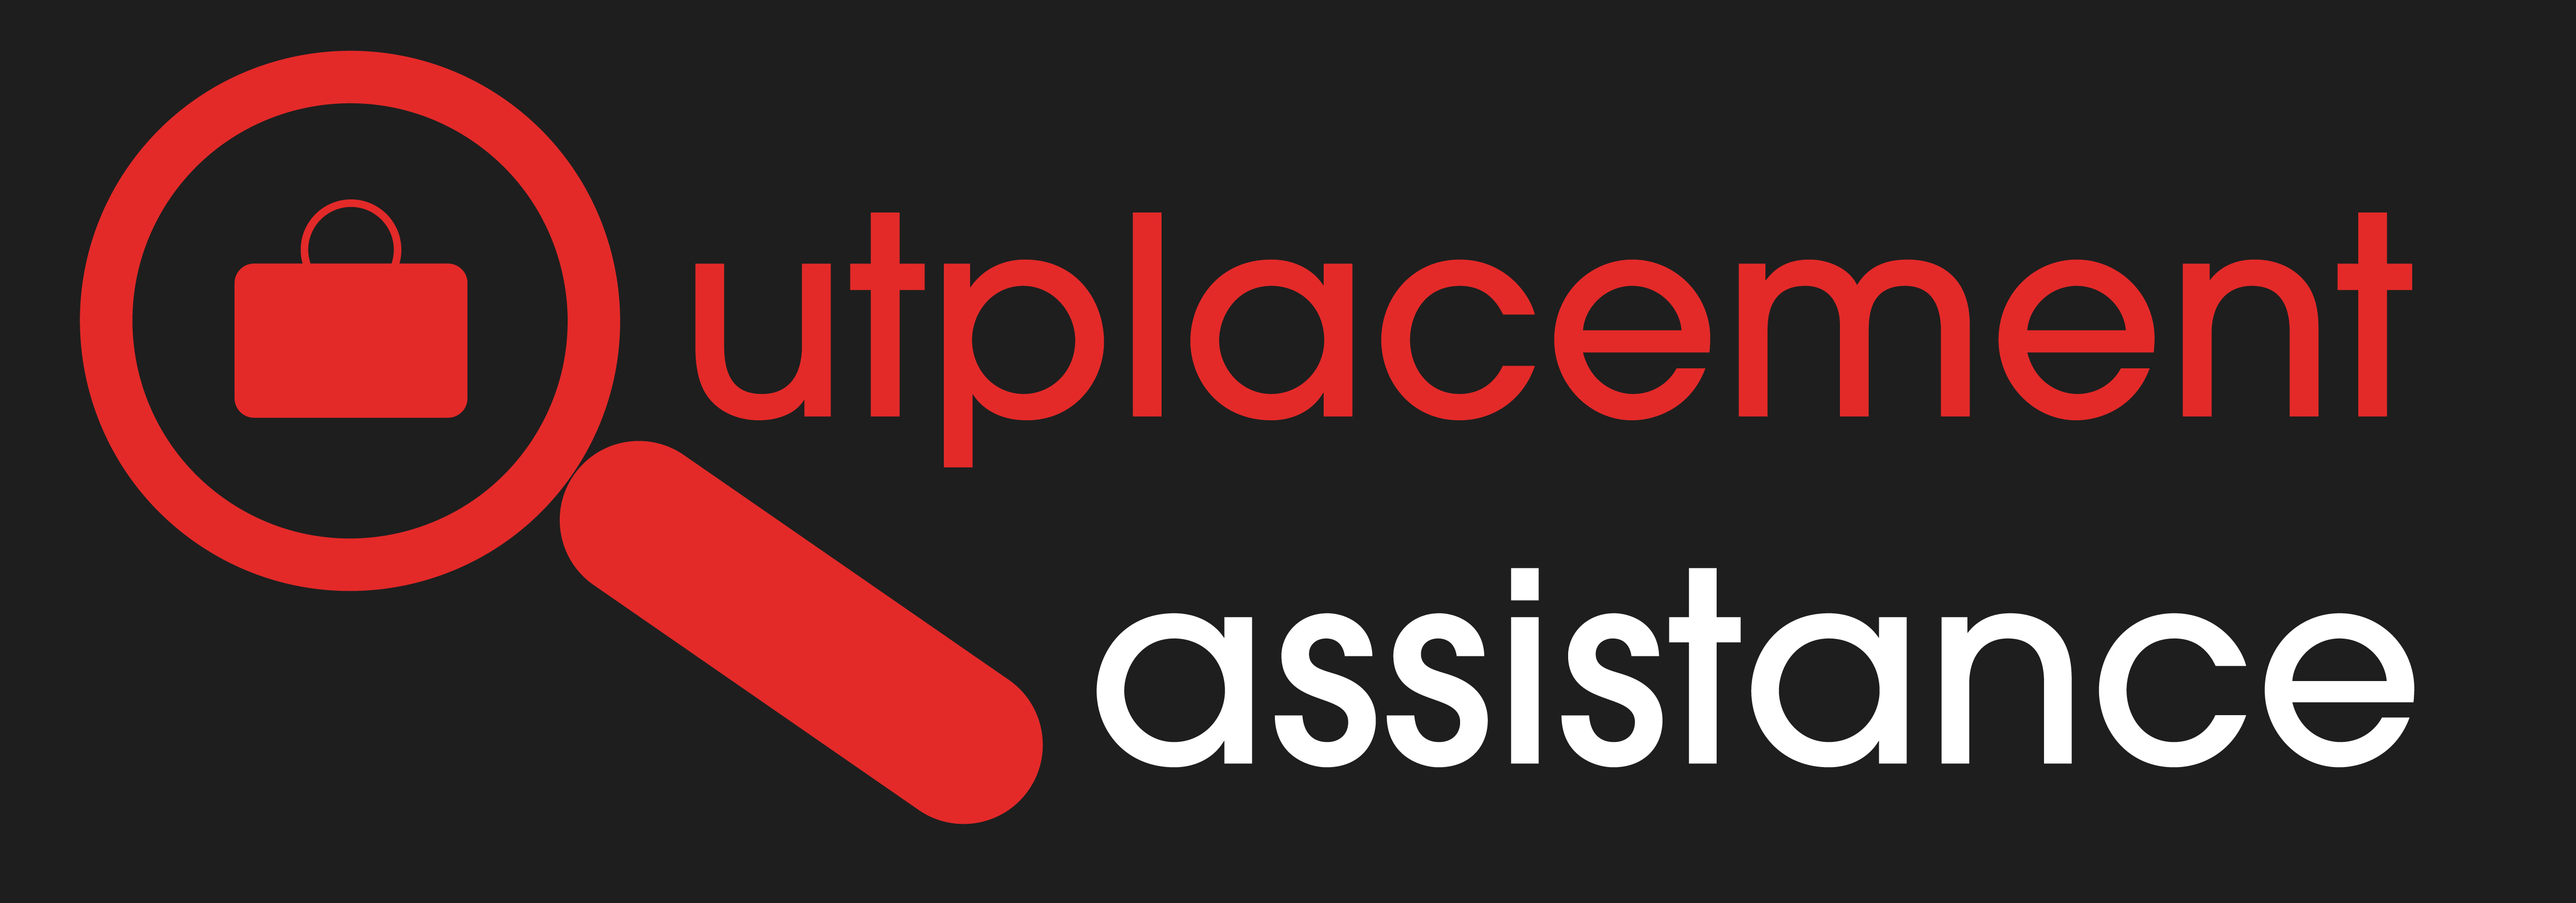 Logo of Outplacement Assistance Coach Hire In London